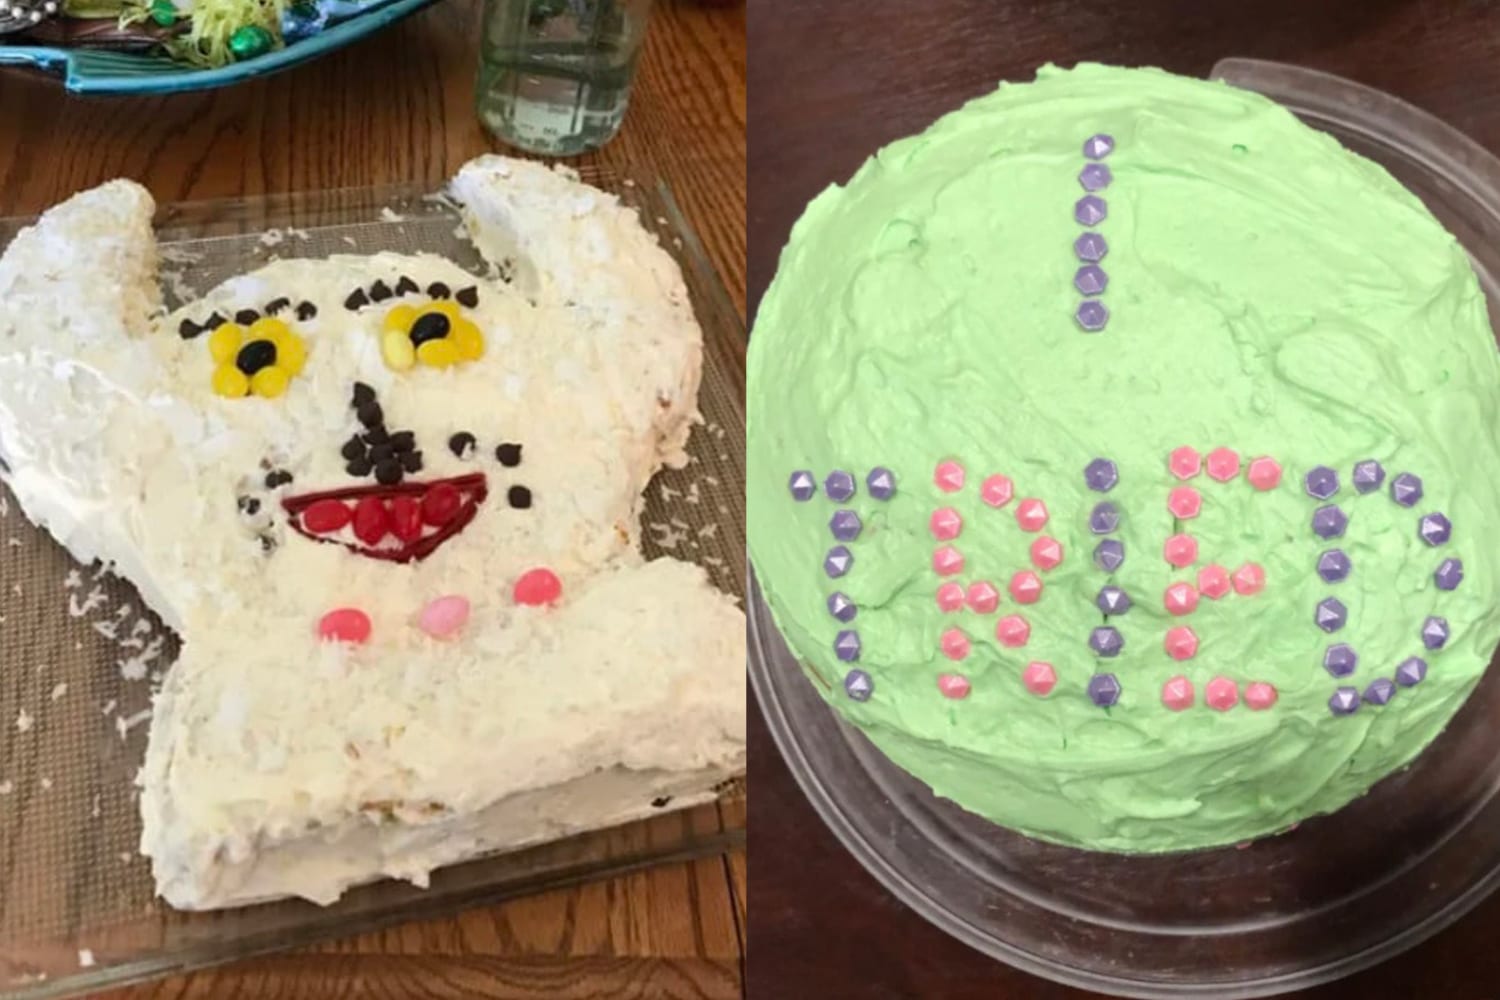 16 epic DIY birthday cake and baking fails that will go down in history |  Metro News